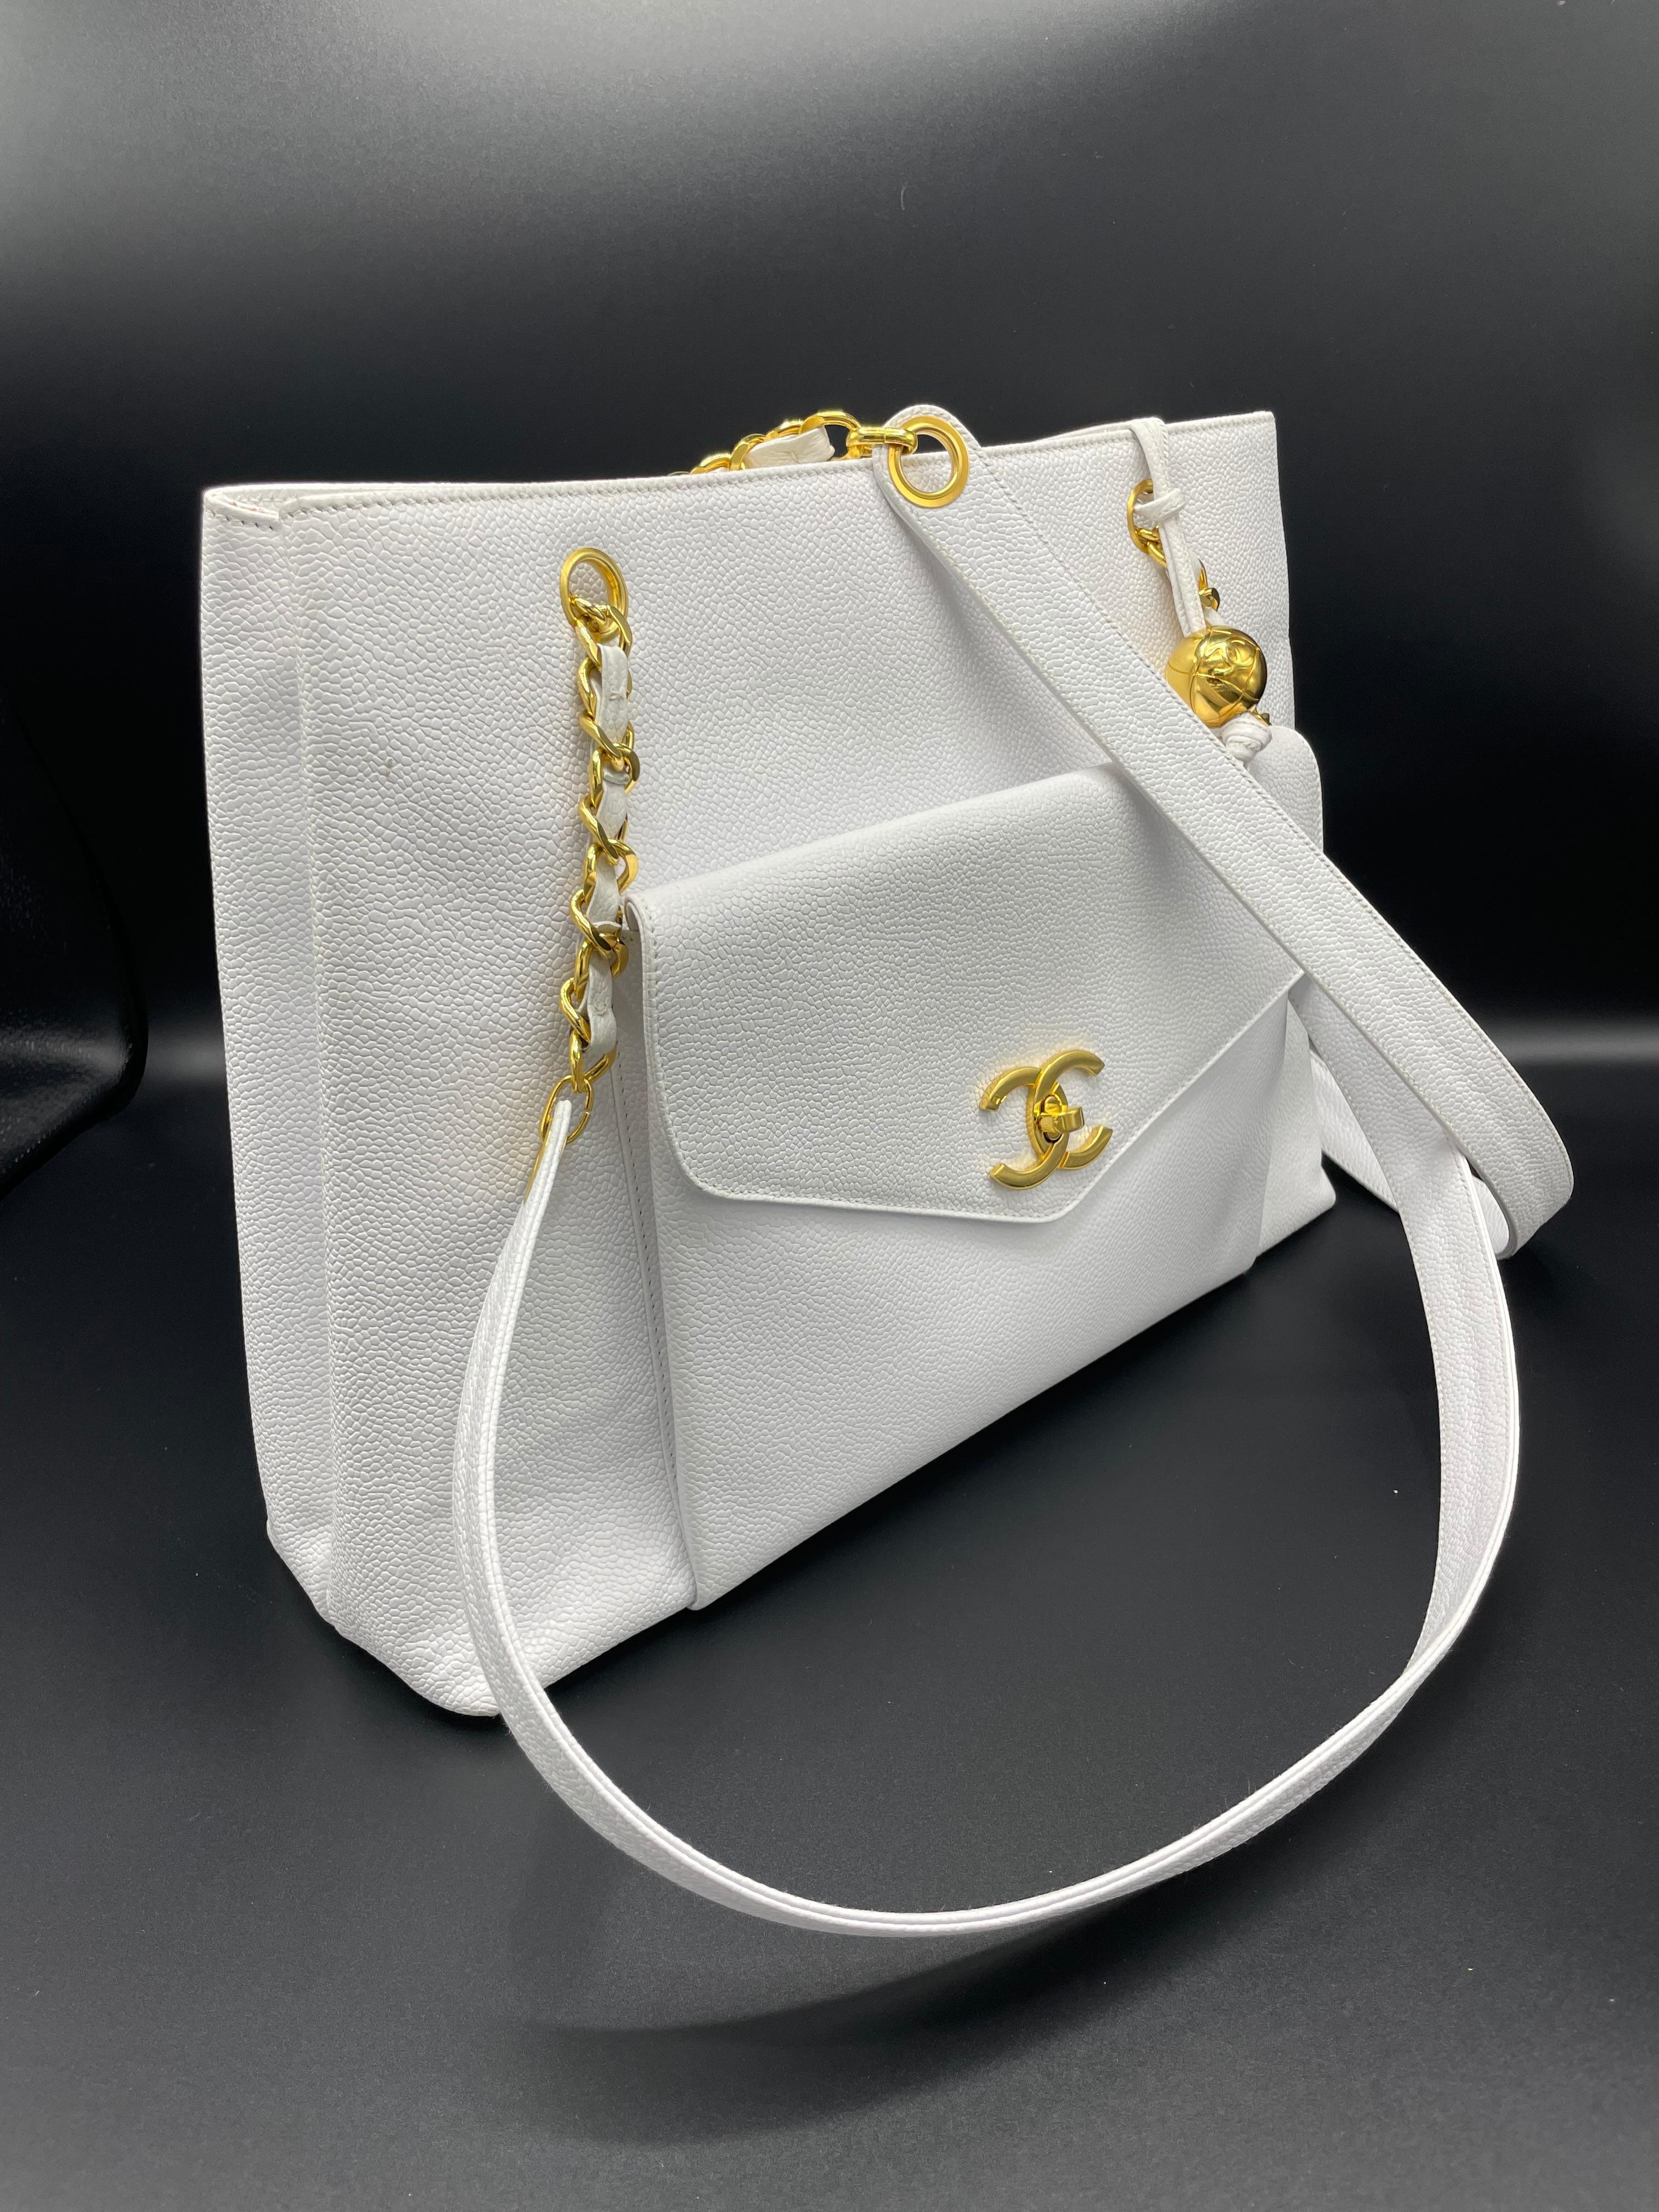 Chanel White Caviar Leather Front Pocket Tote Bag For Sale 1